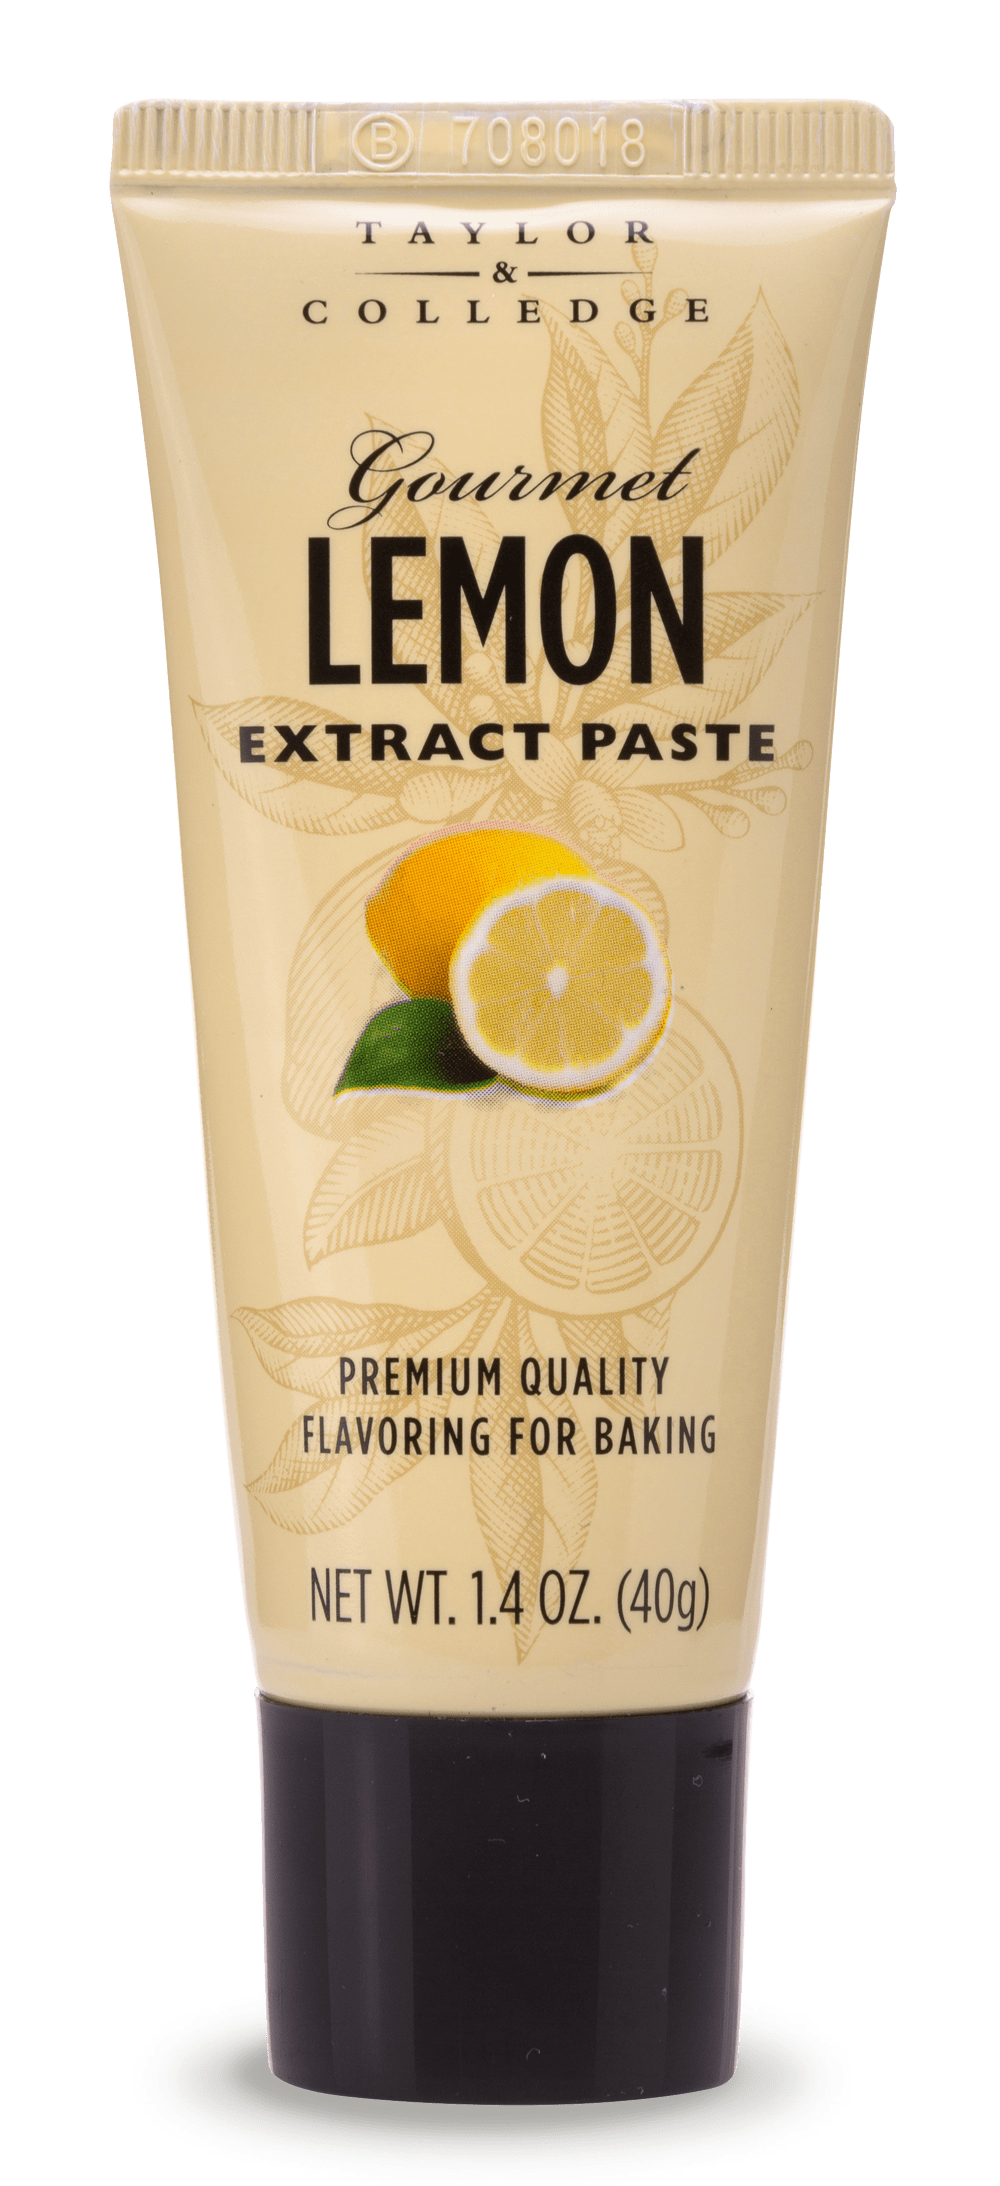 Gourmet Lemon Extract Paste - Taylor and Colledge